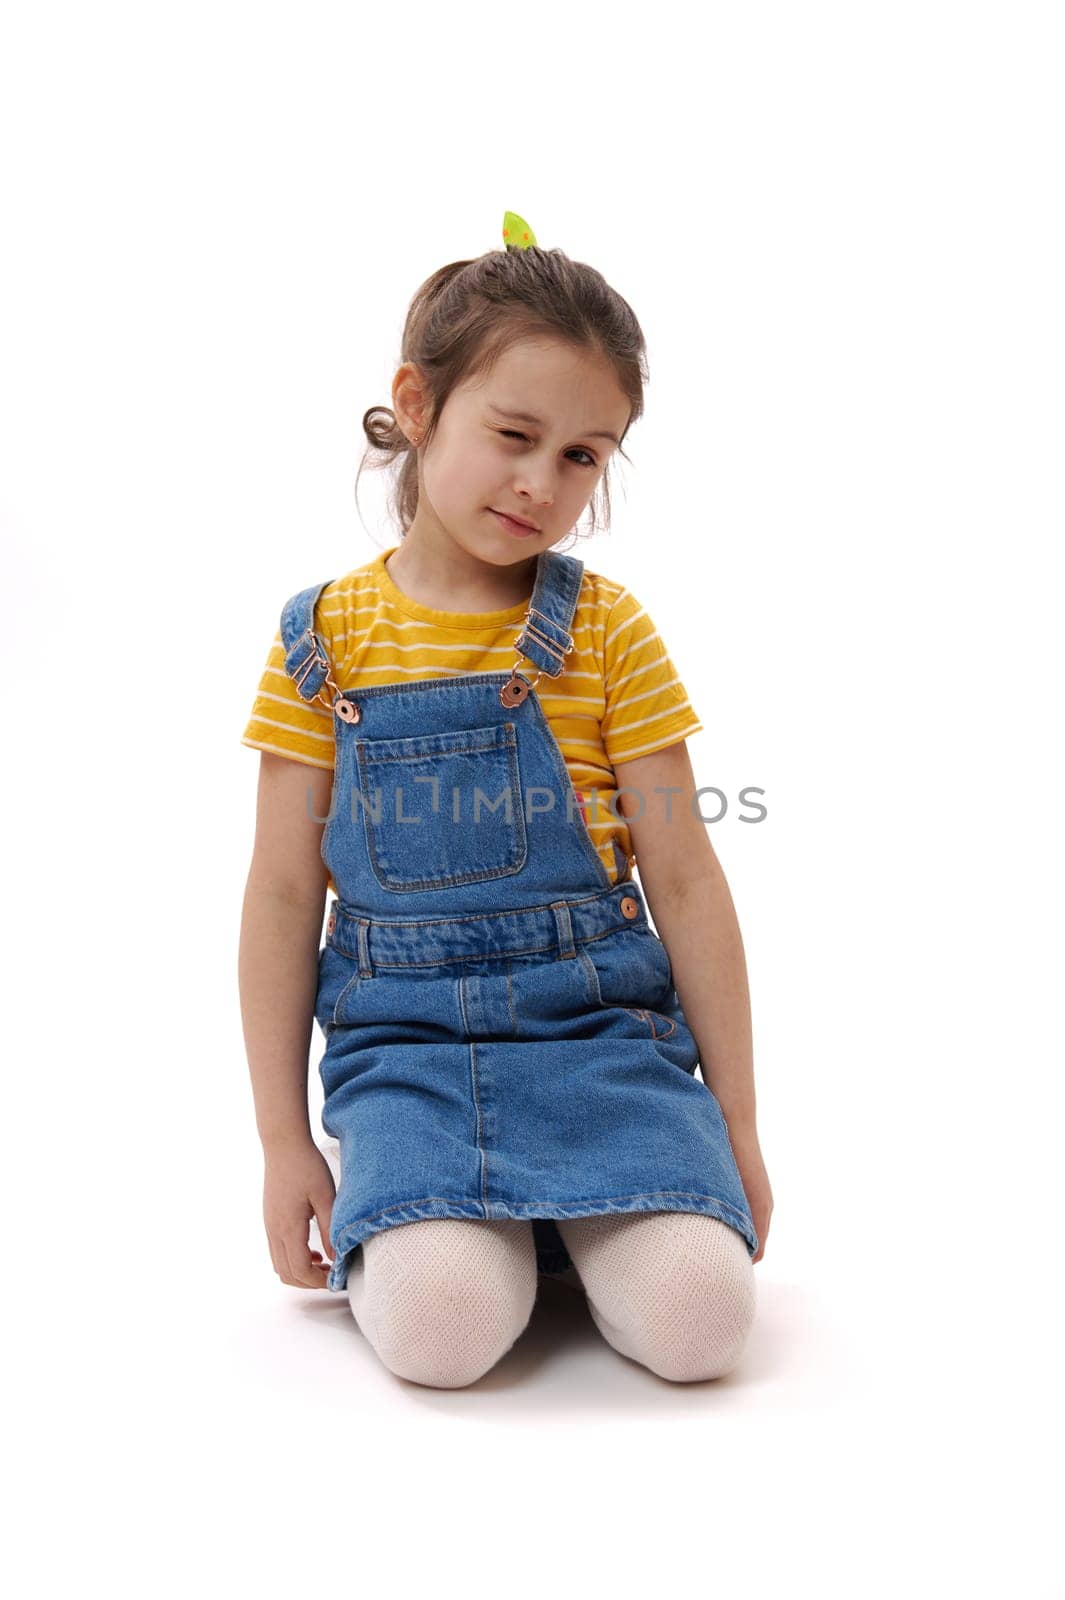 Caucasian lovely little child girl, wearing yellow t-shirt and blue denim overalls, making faces, blinking looking at camera, sitting on her knees on isolated white background. Vertical studio shot